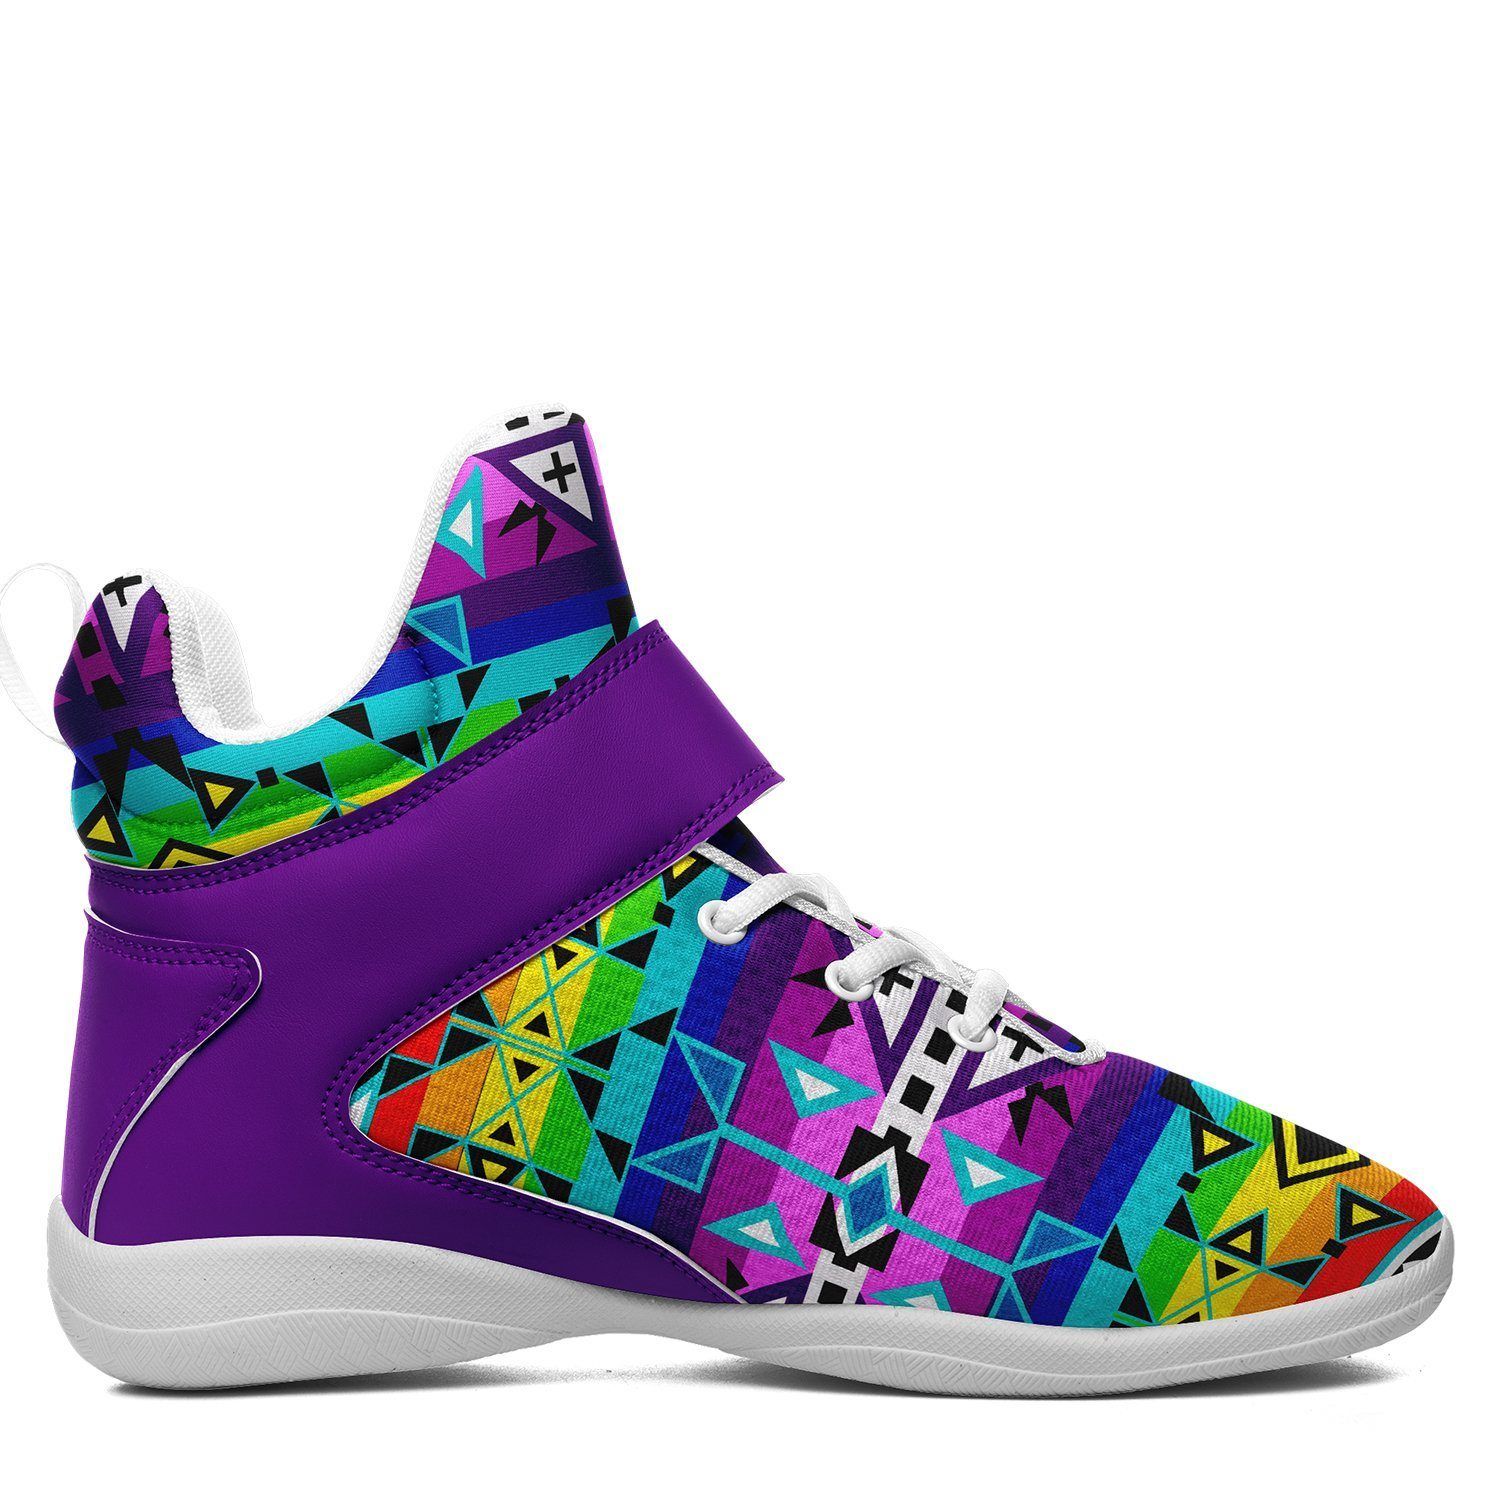 After the Rain Ipottaa Basketball / Sport High Top Shoes - White Sole 49 Dzine 